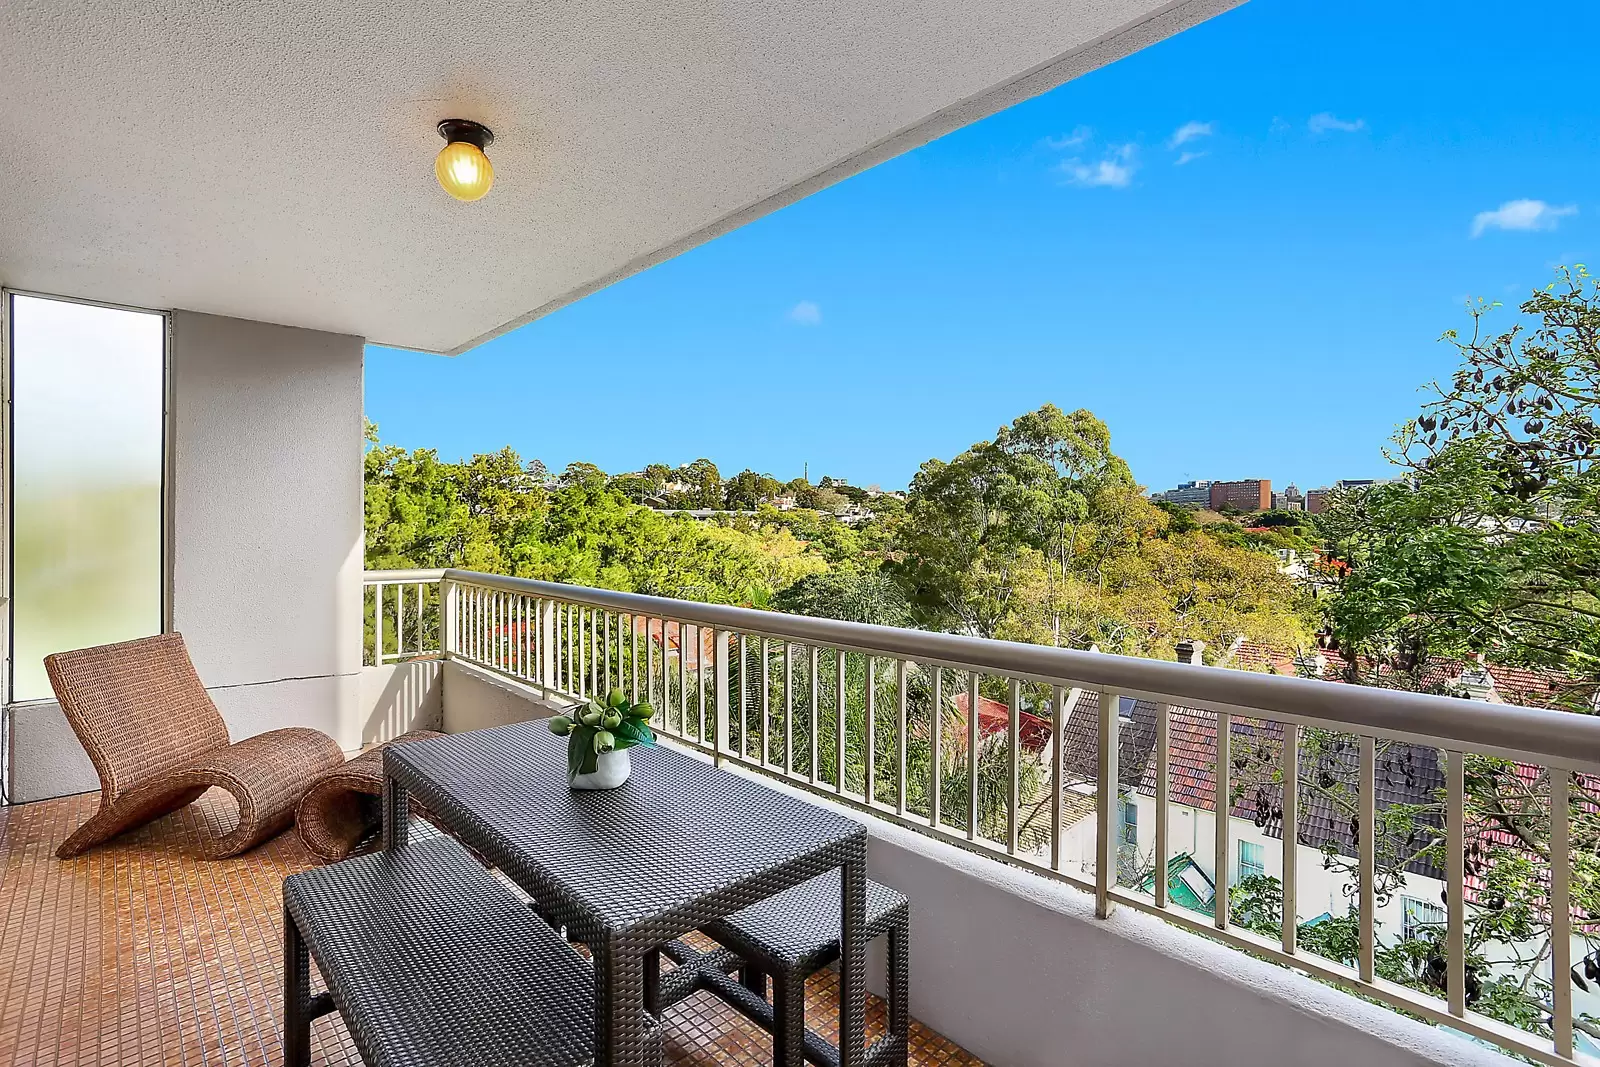 Photo #5: 21/4 New Mclean Street, Edgecliff - Sold by Sydney Sotheby's International Realty